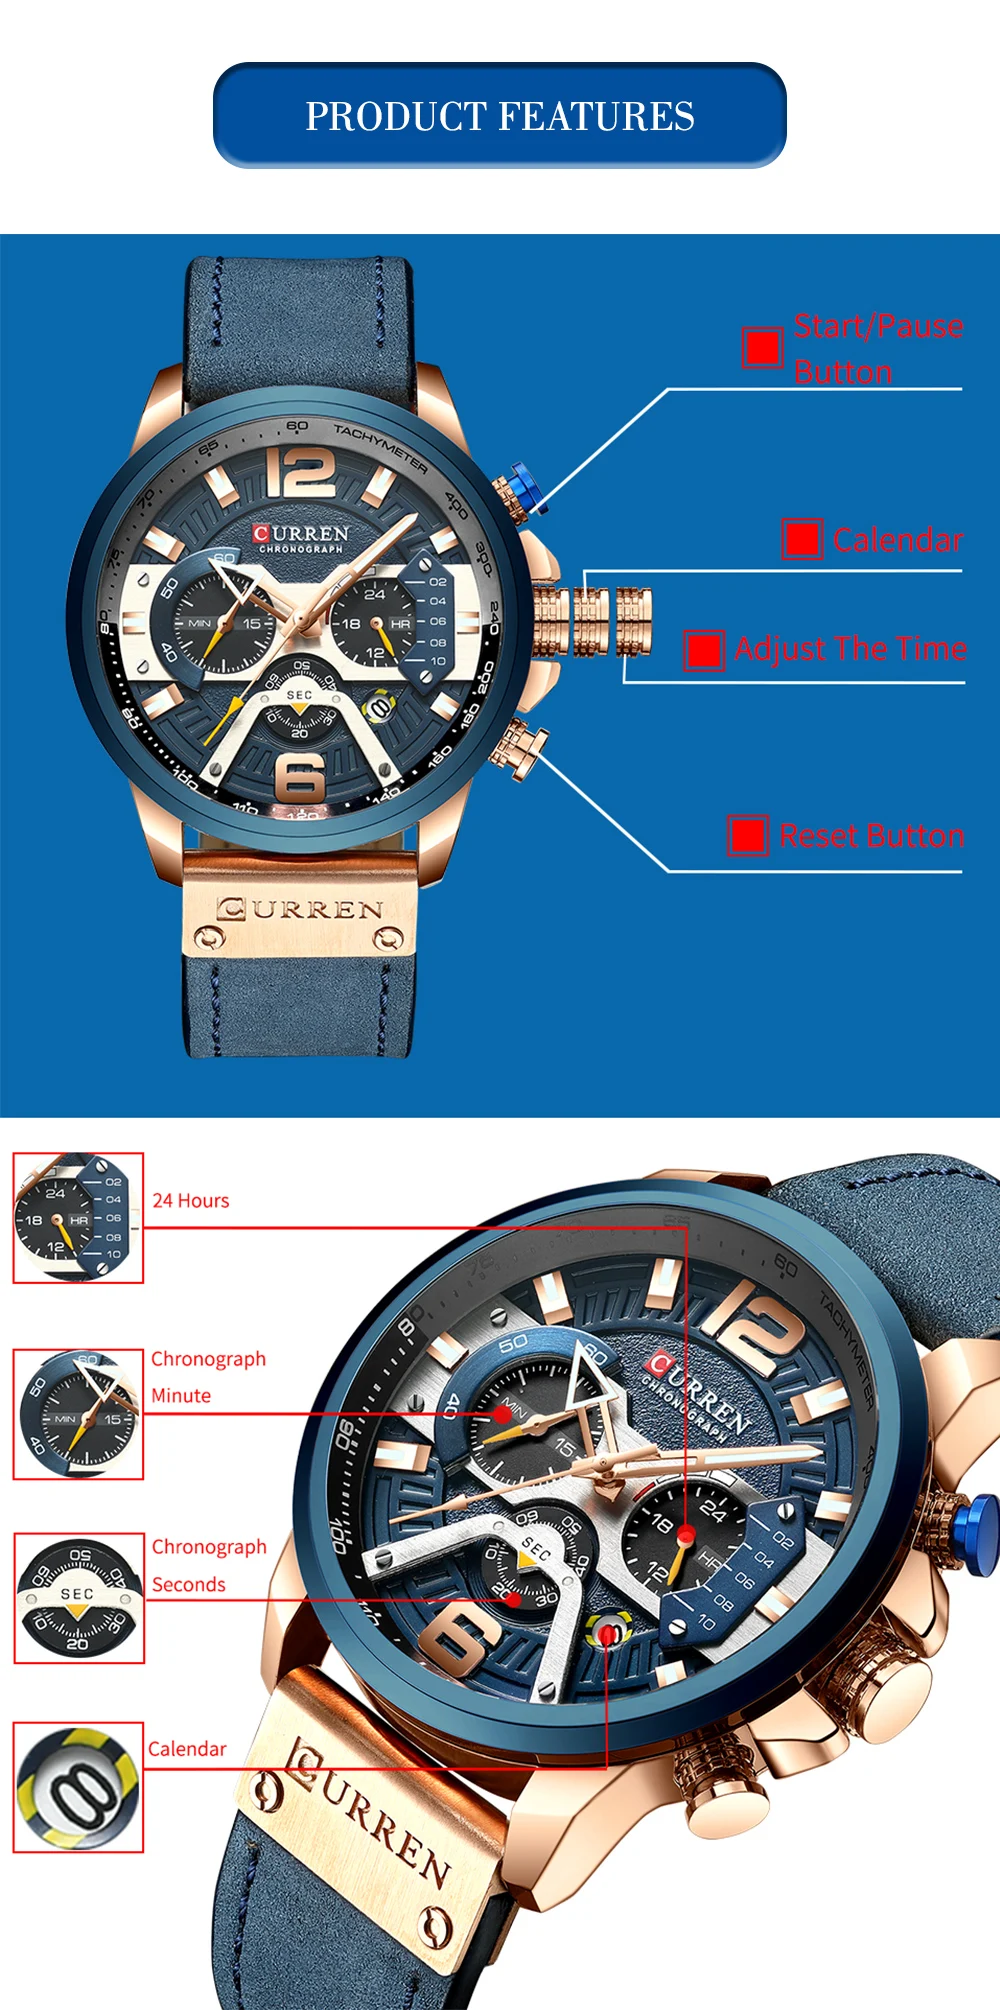 CURREN 8329 Top Brand Watches Male Clock Sport Military Leather Strap Chronograph Watches Men Wrist